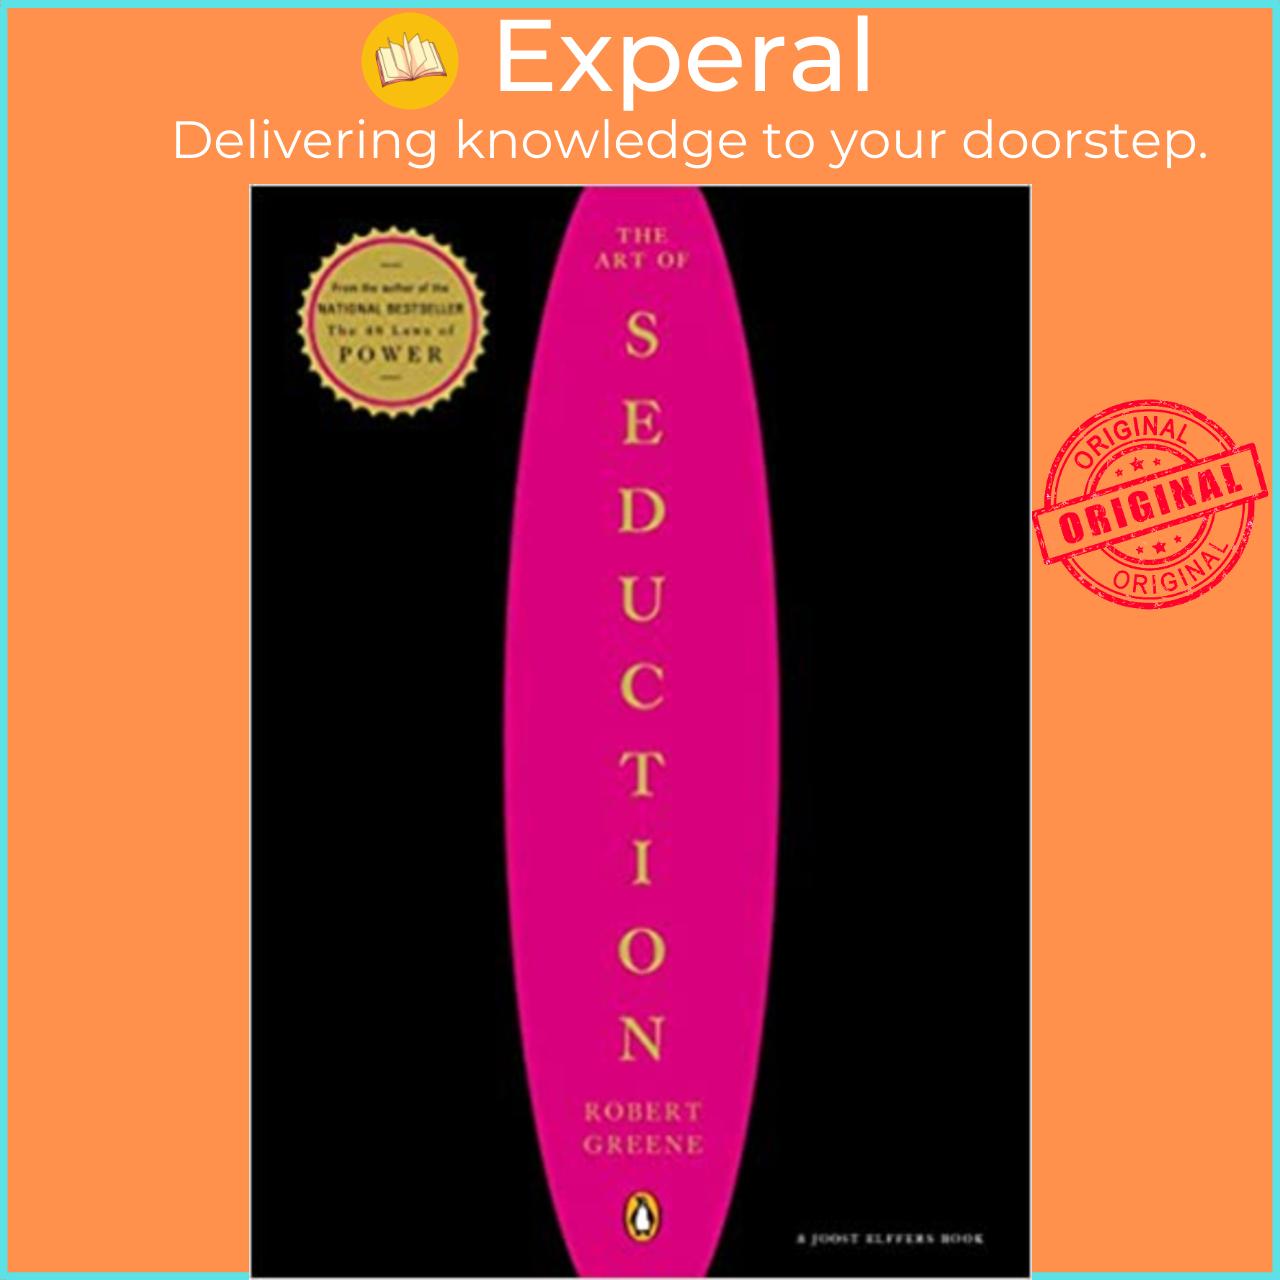 Sách - The Art of Seduction by Robert Greene - (US Edition, paperback)